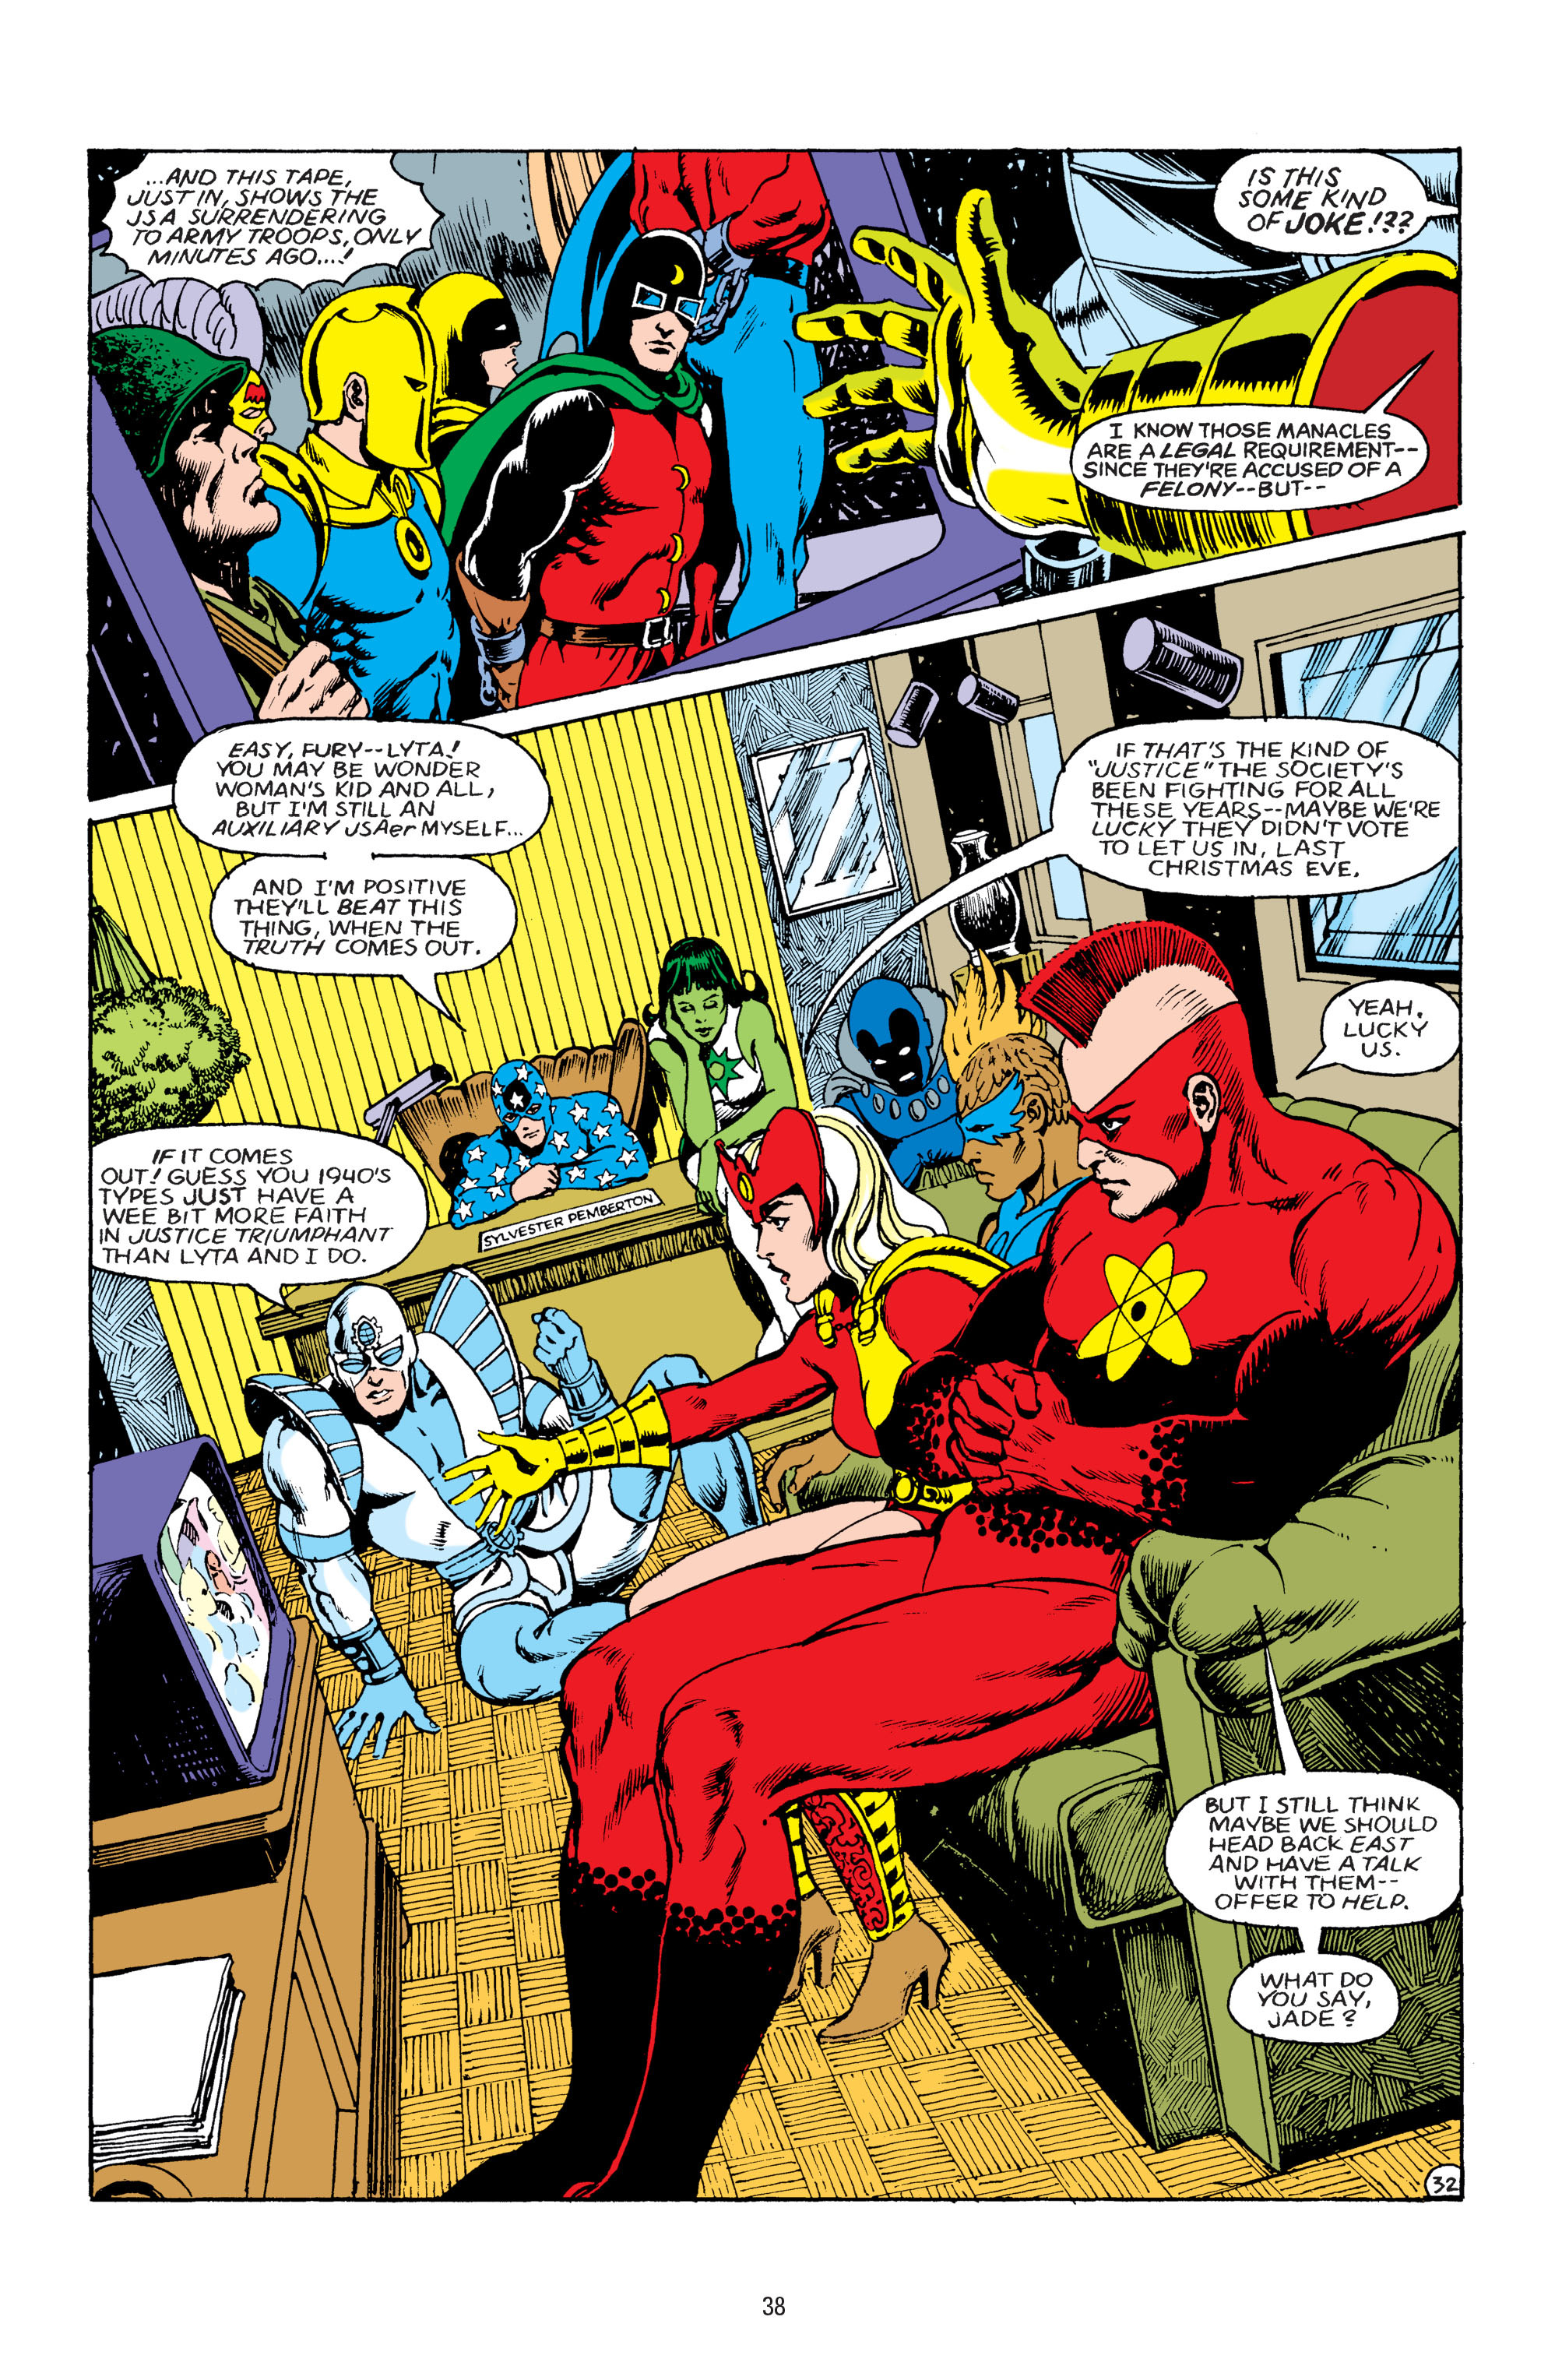 Read online America vs. the Justice Society comic -  Issue # TPB - 36